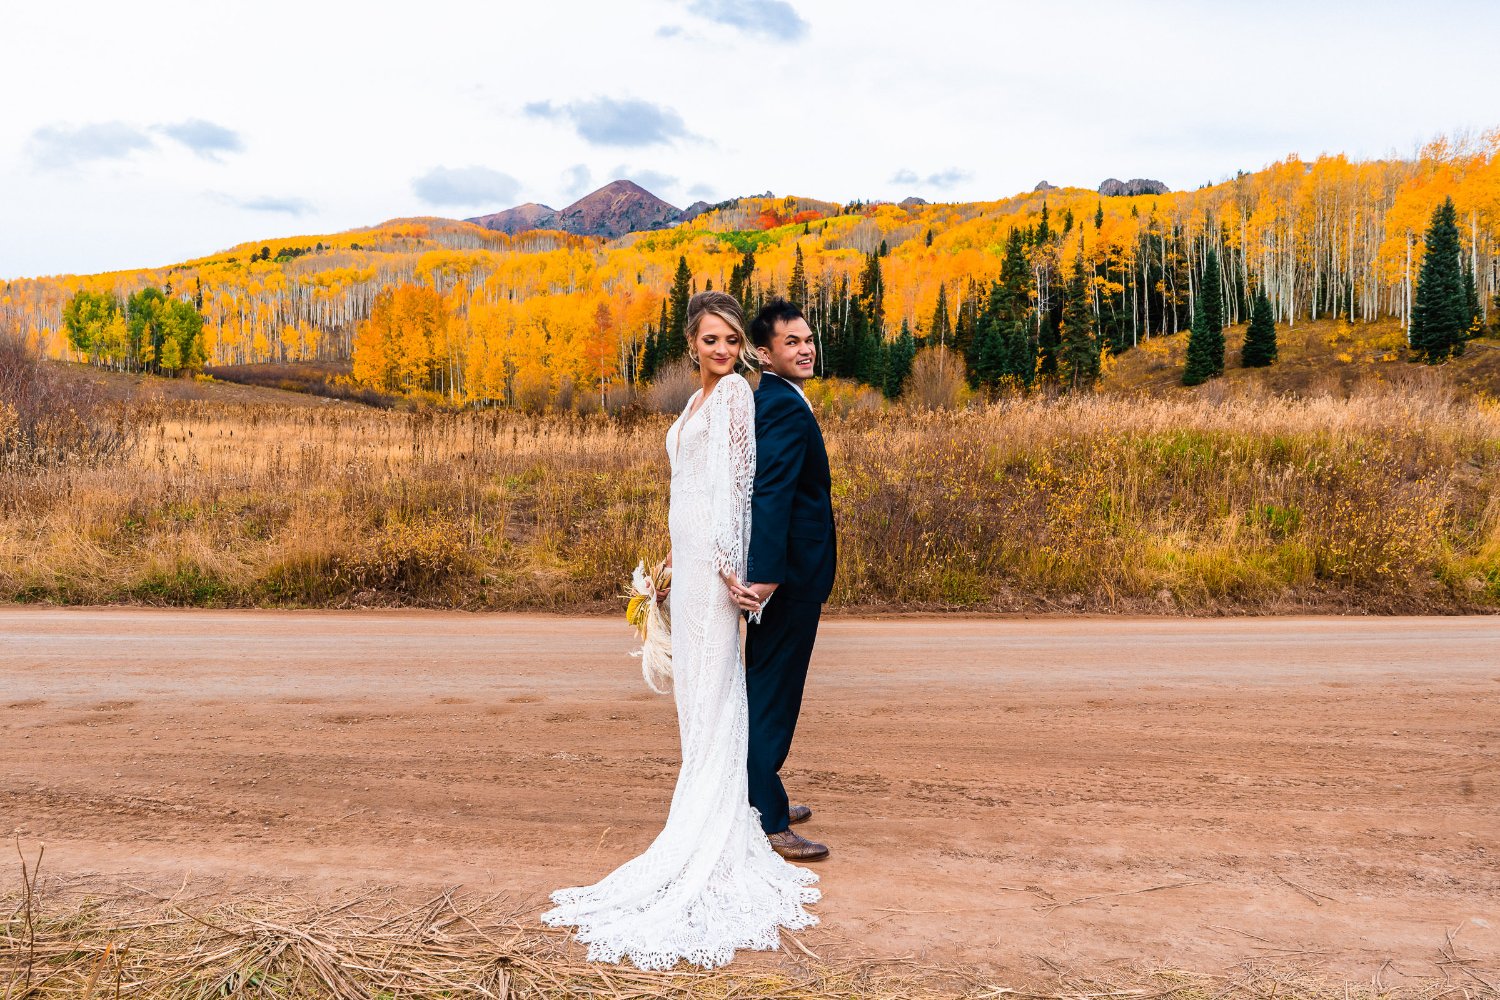 A stunning elopement photo capturing a bride and groom amidst the breathtaking aspen trees in Colorado.